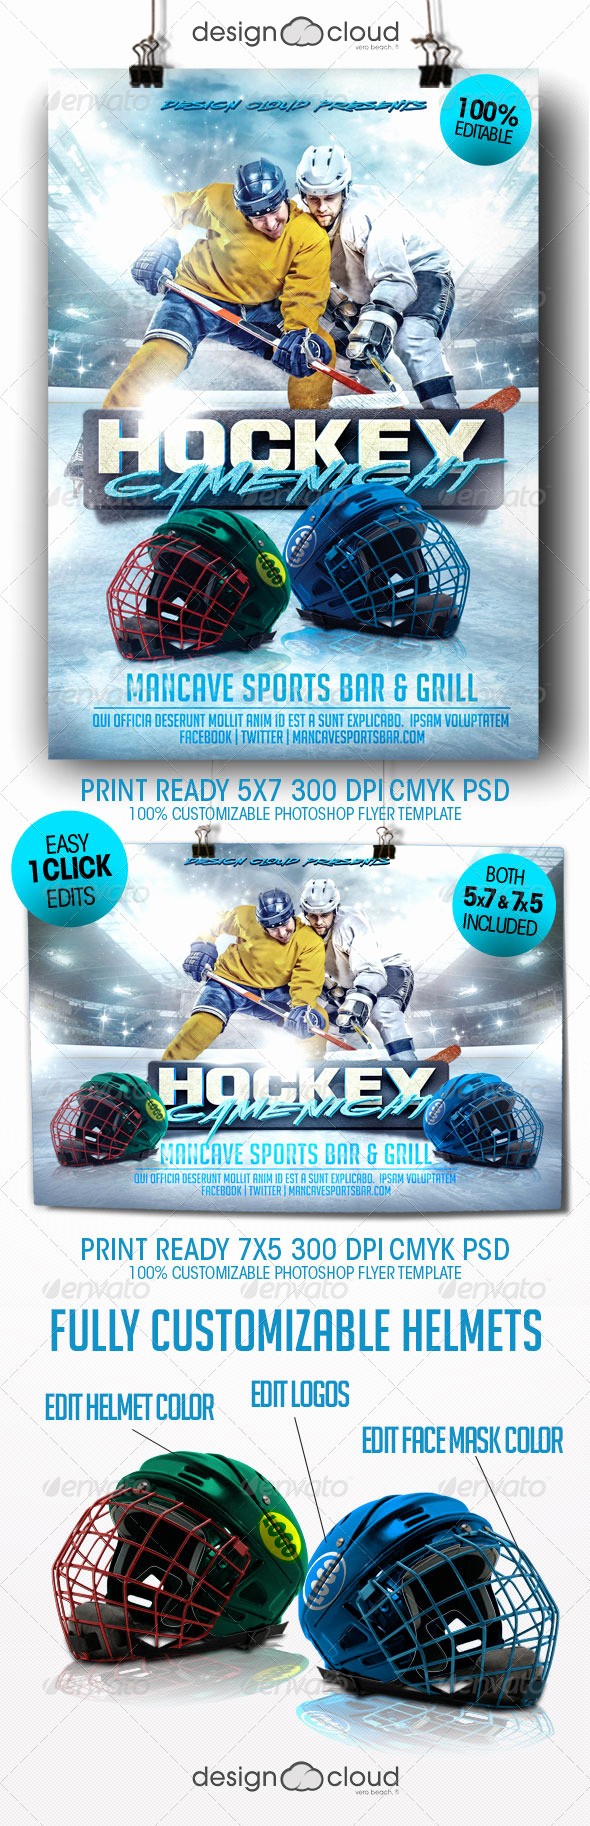 Free Game Night Flyer Template Best Of Hockey Game Night Flyer Template